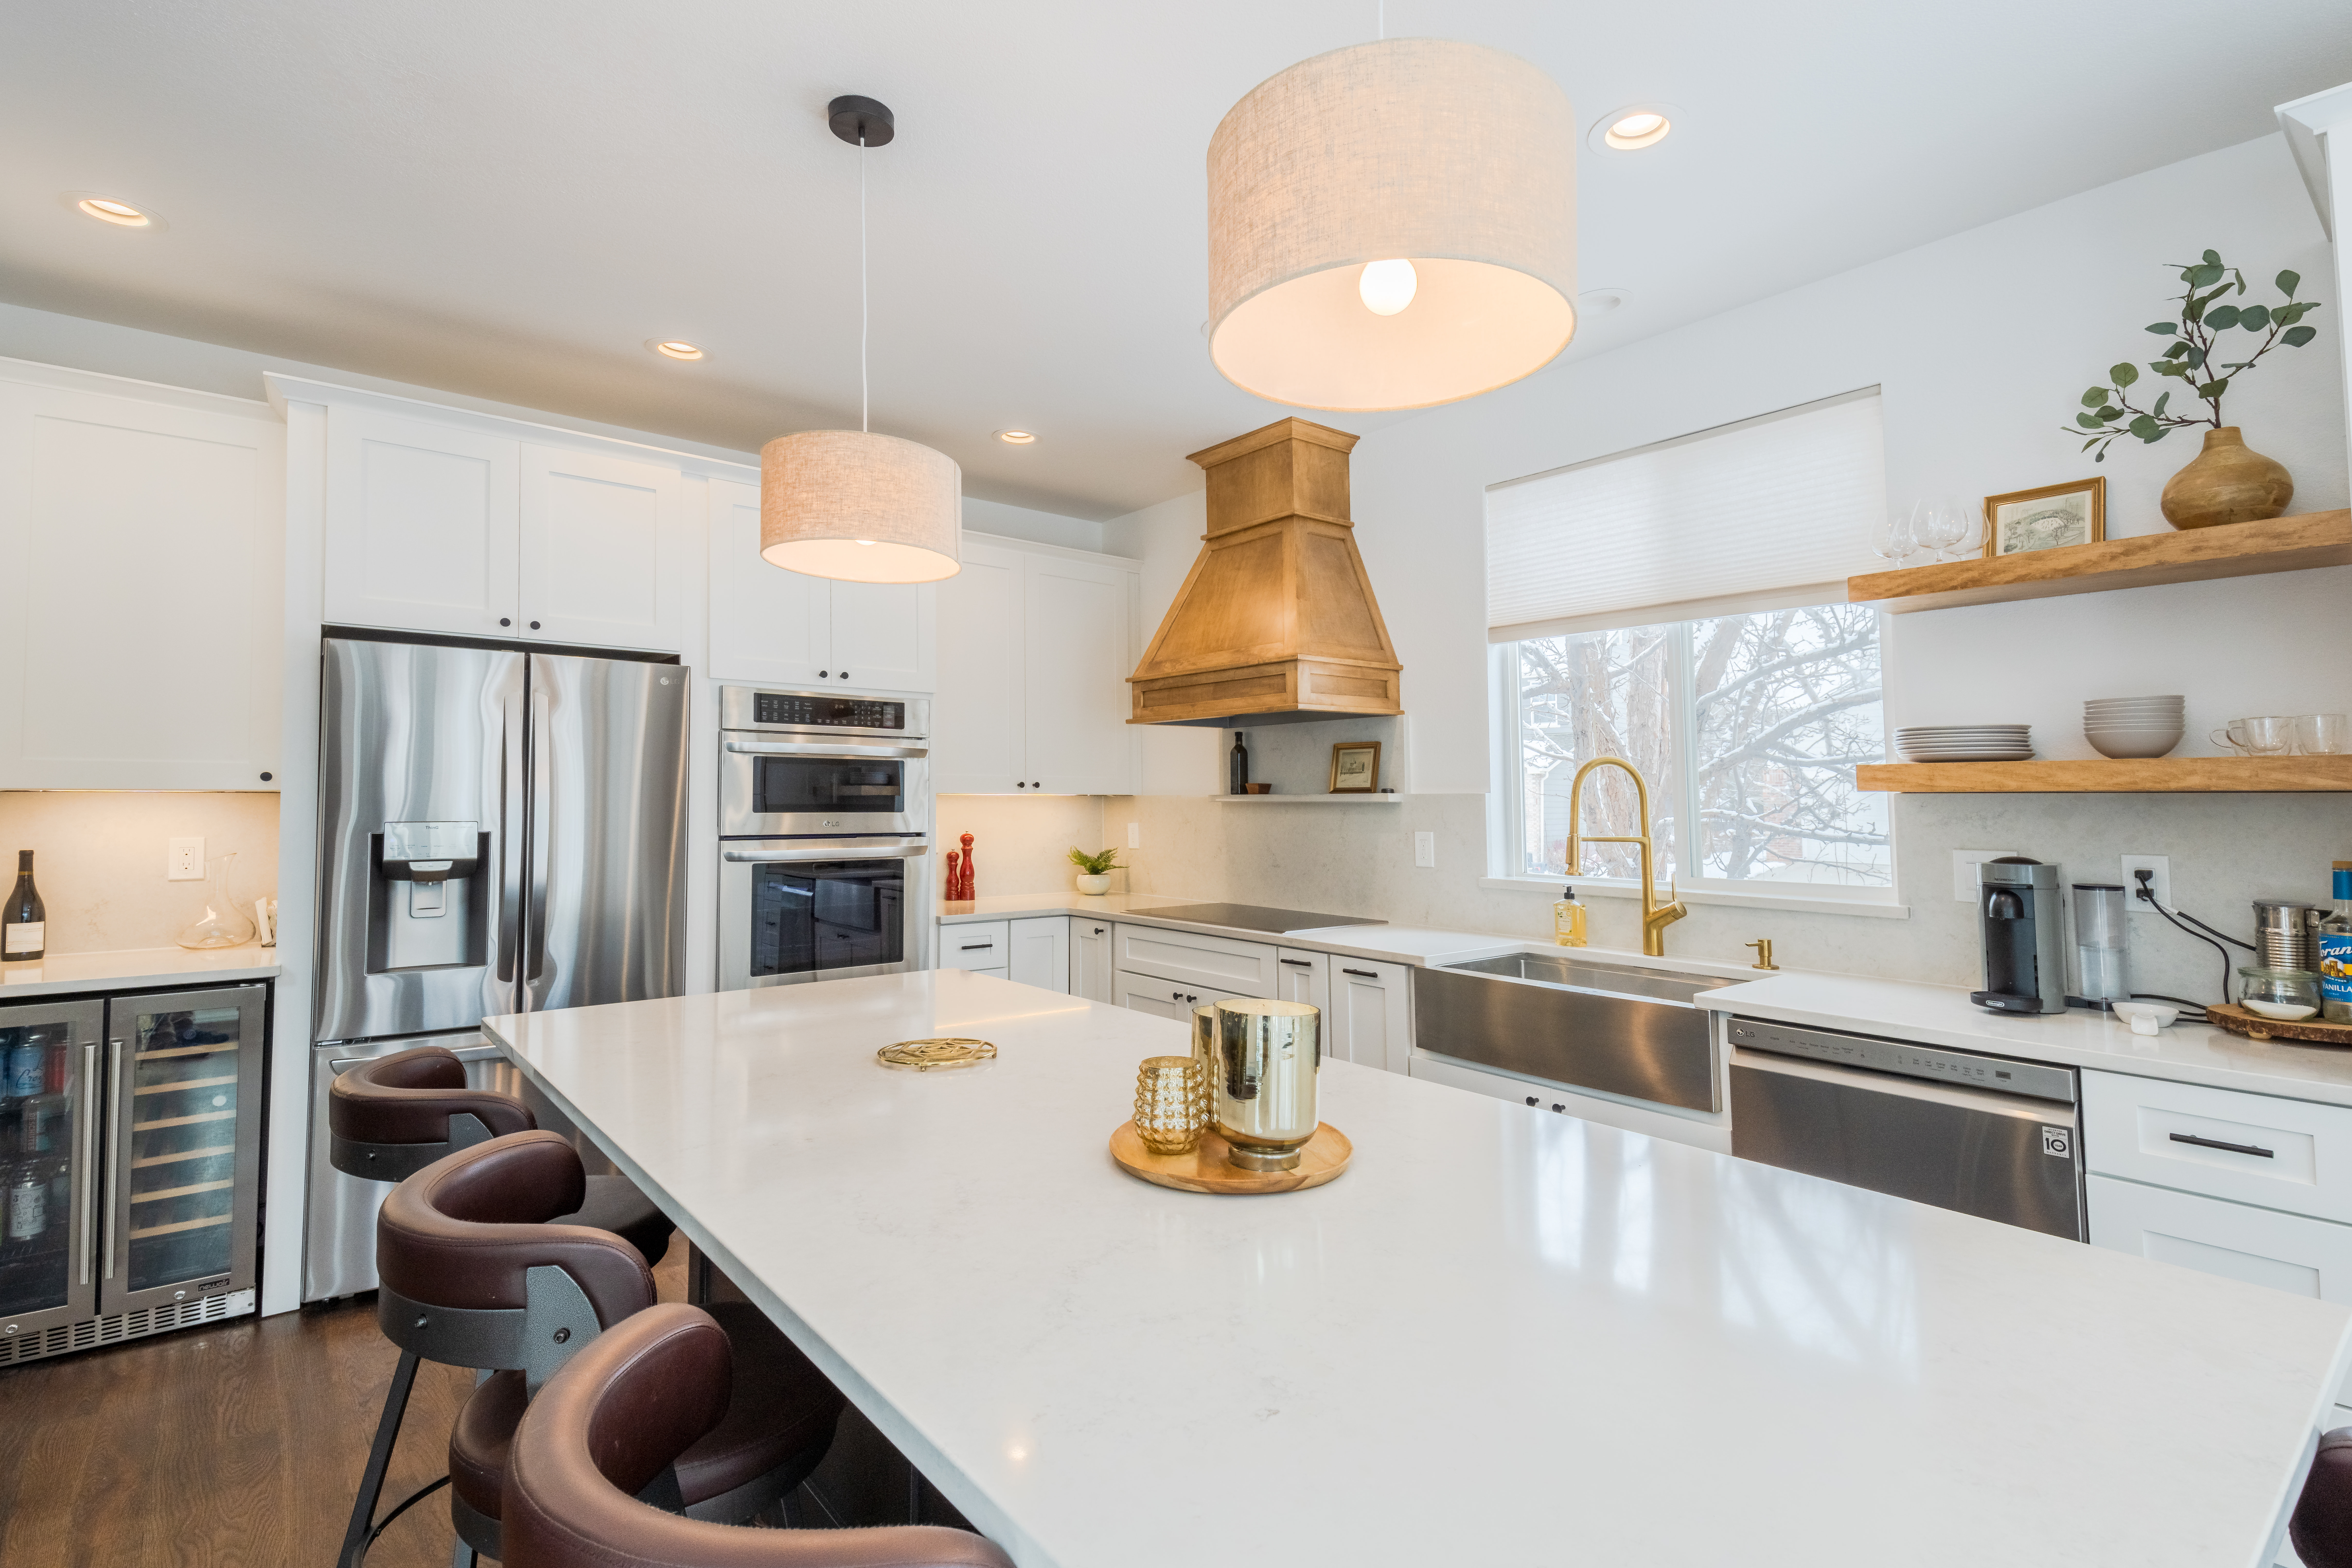 A new kitchen island stands at the center of a new kitchen remodel, lit warmly with newly installed lighting.